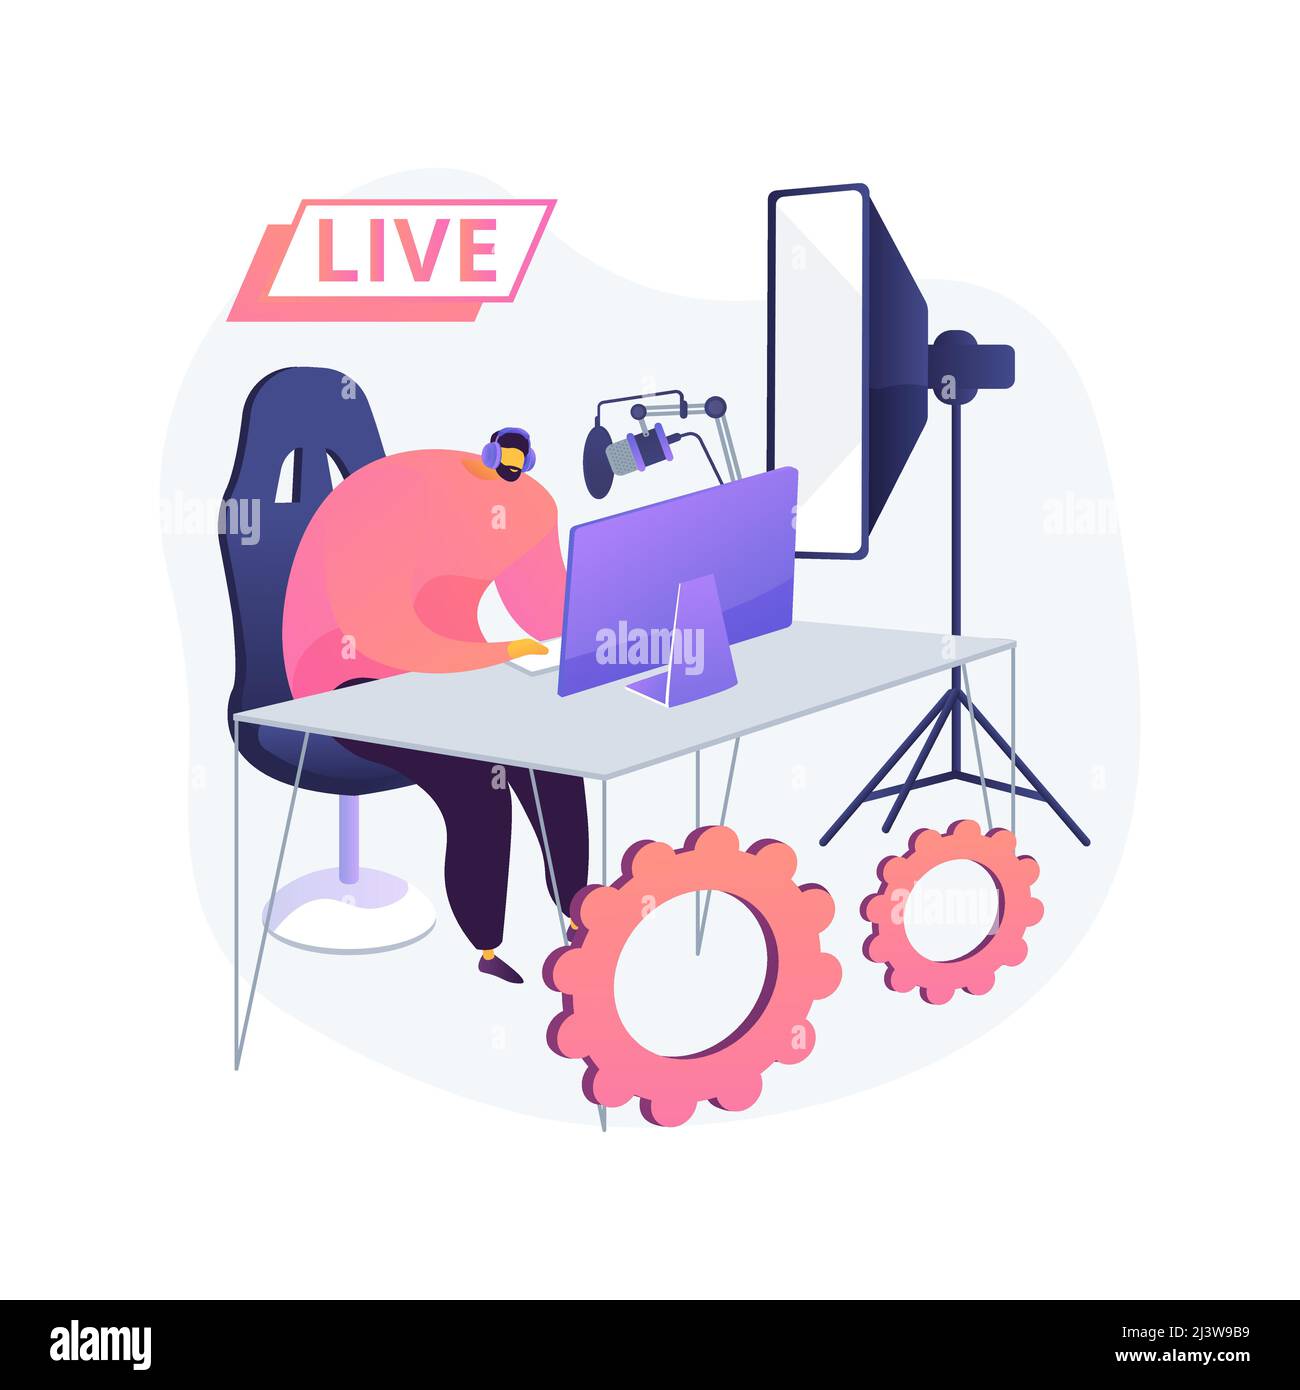 Professional livestream abstract concept vector illustration. Professional online event stream, broadcasting service, livestream equipment, software s Stock Vector